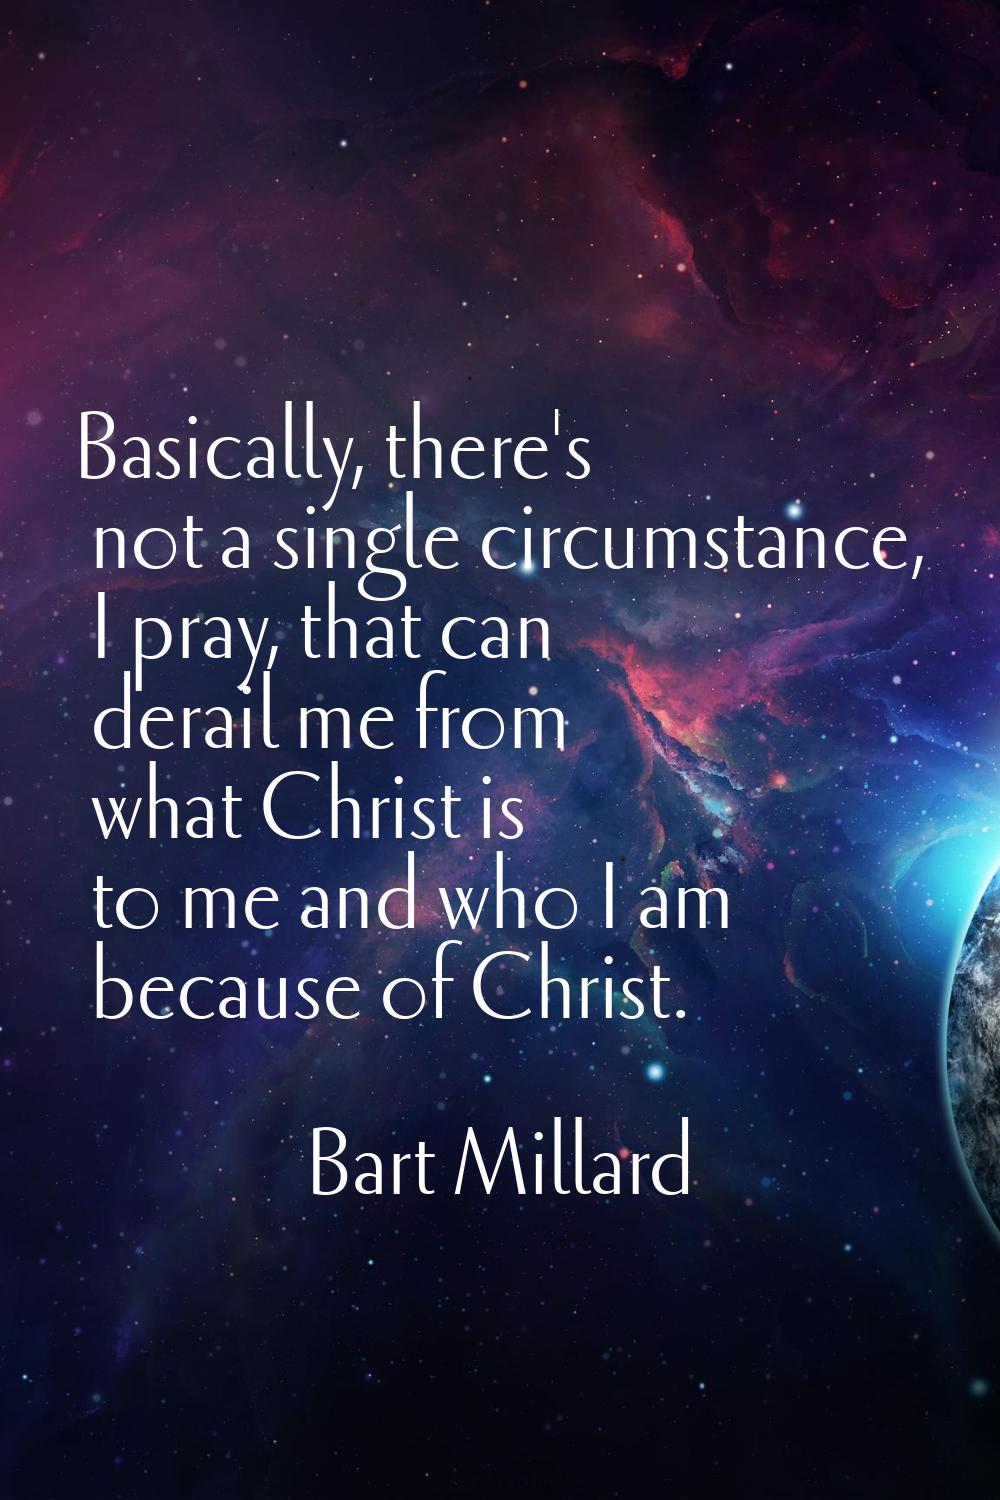 Basically, there's not a single circumstance, I pray, that can derail me from what Christ is to me 